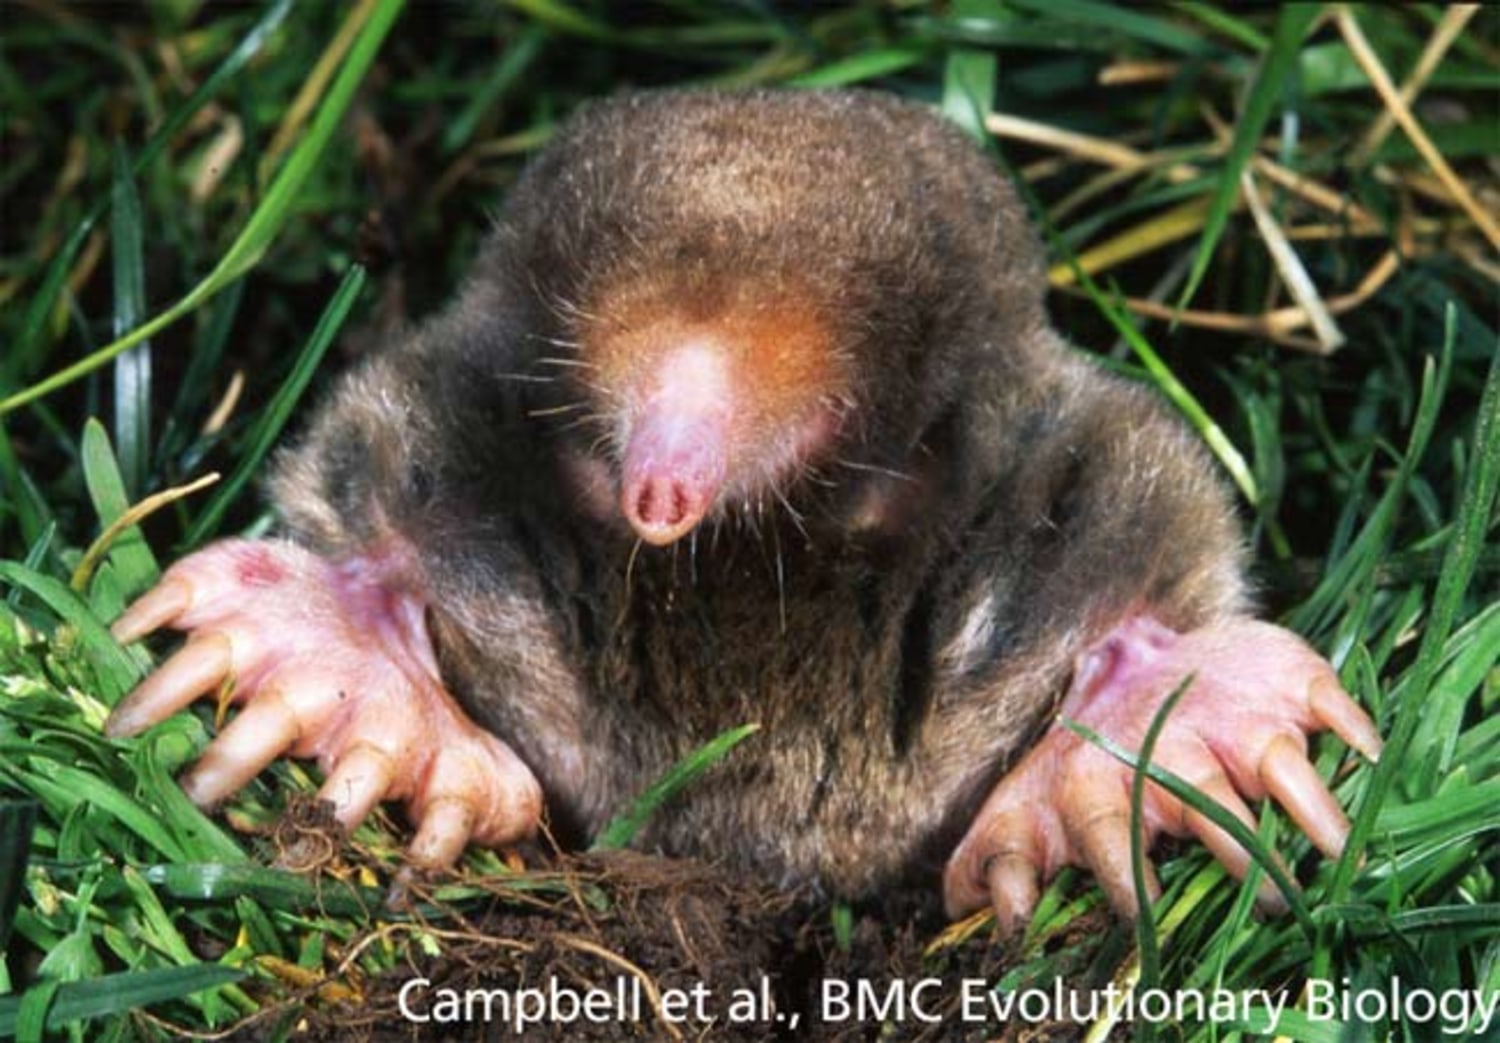 Do Moles Have Other Adaptations?